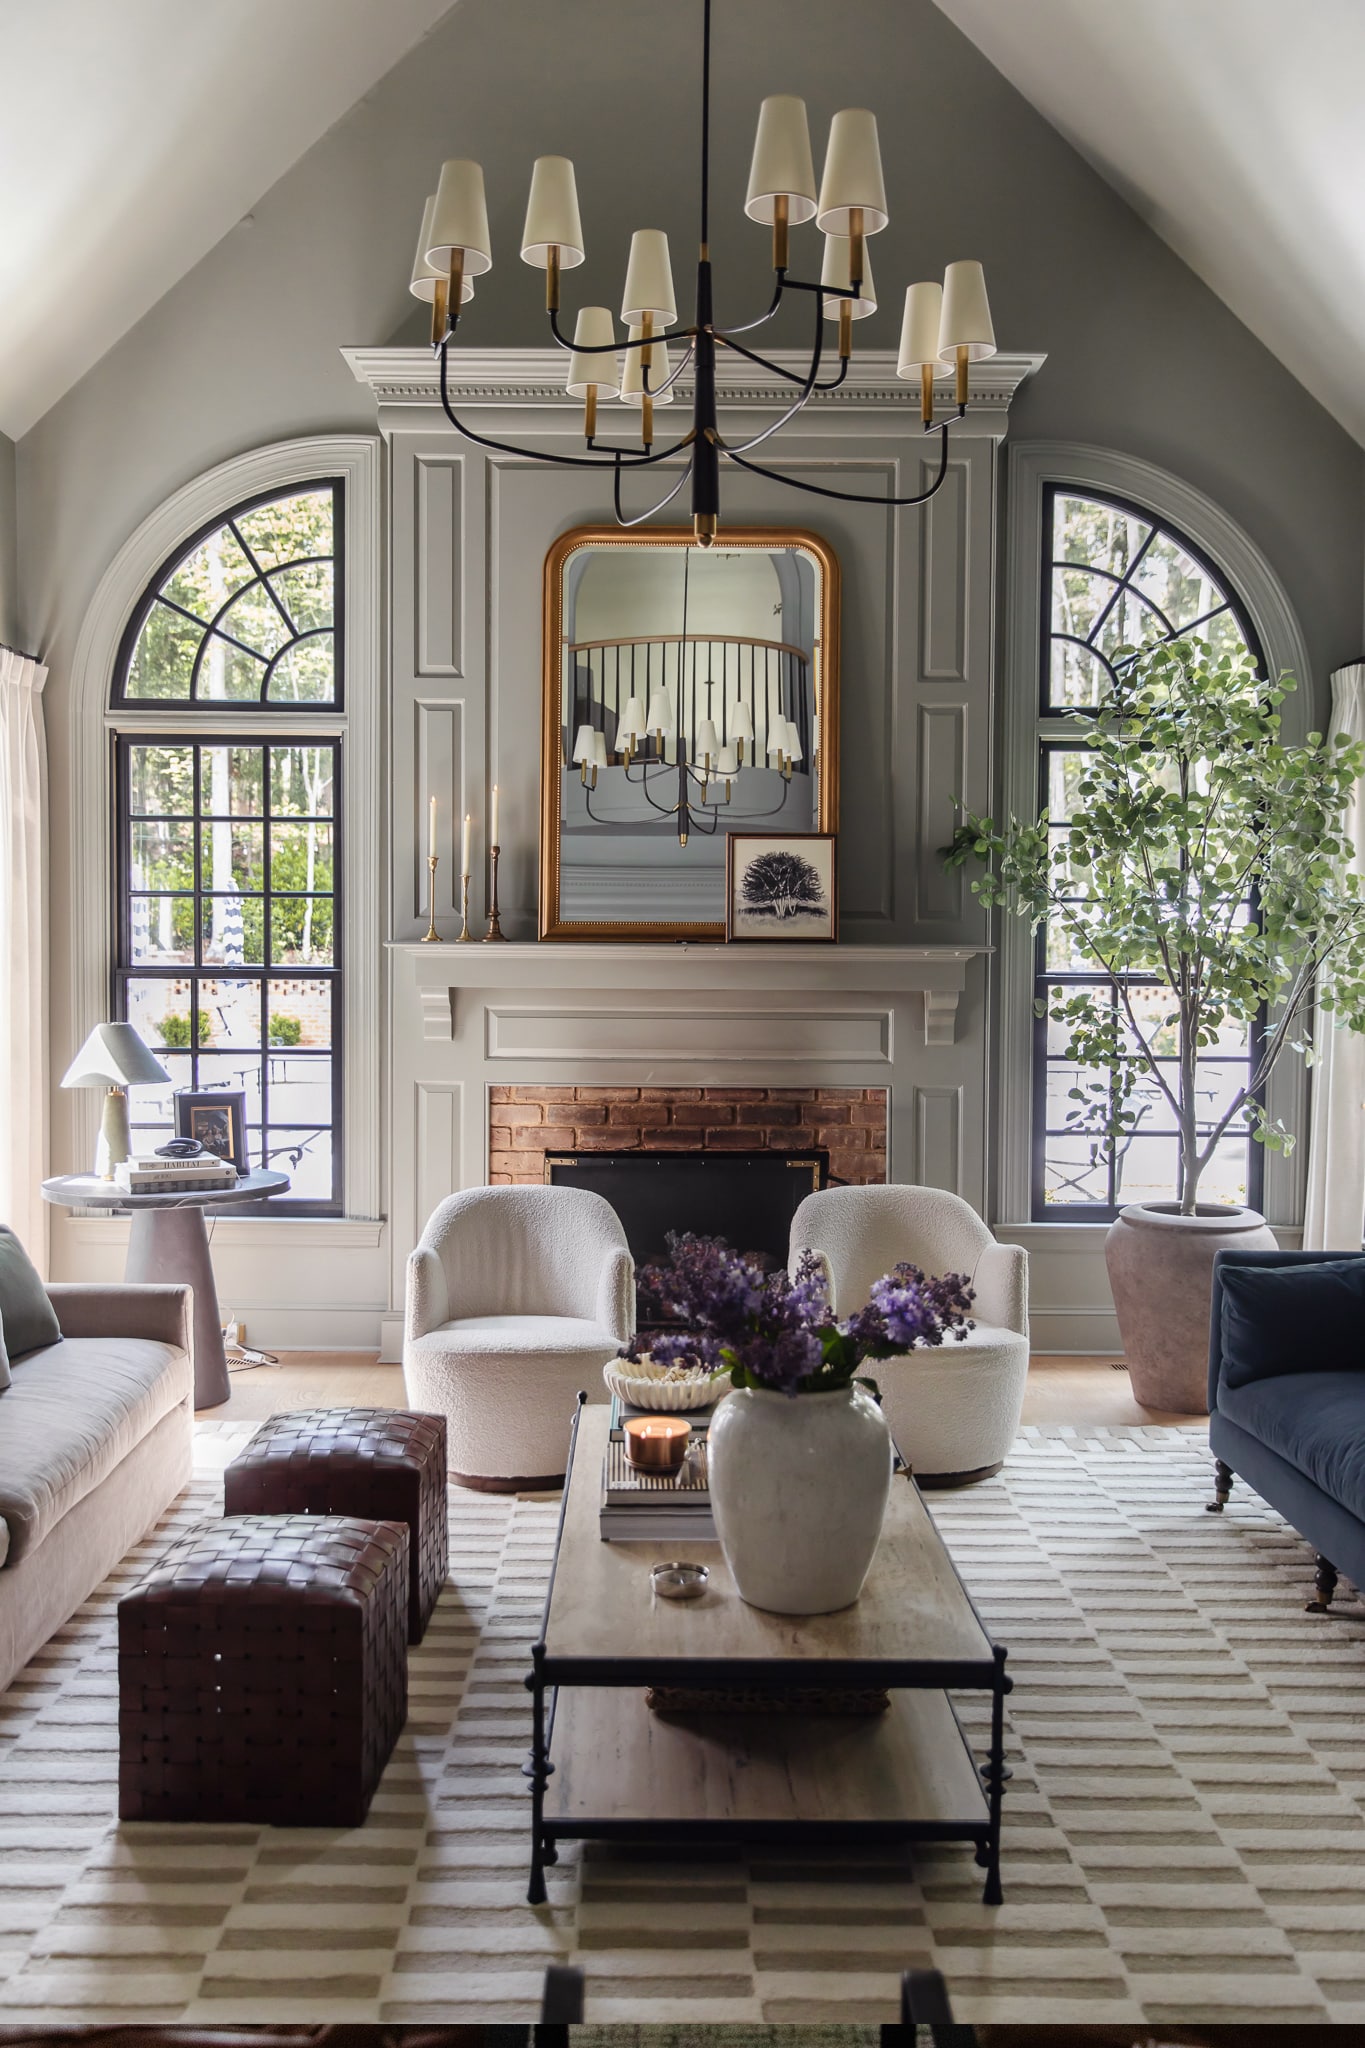 Chris Loves Julia | The living room with new black arched windows flanking the fireplace